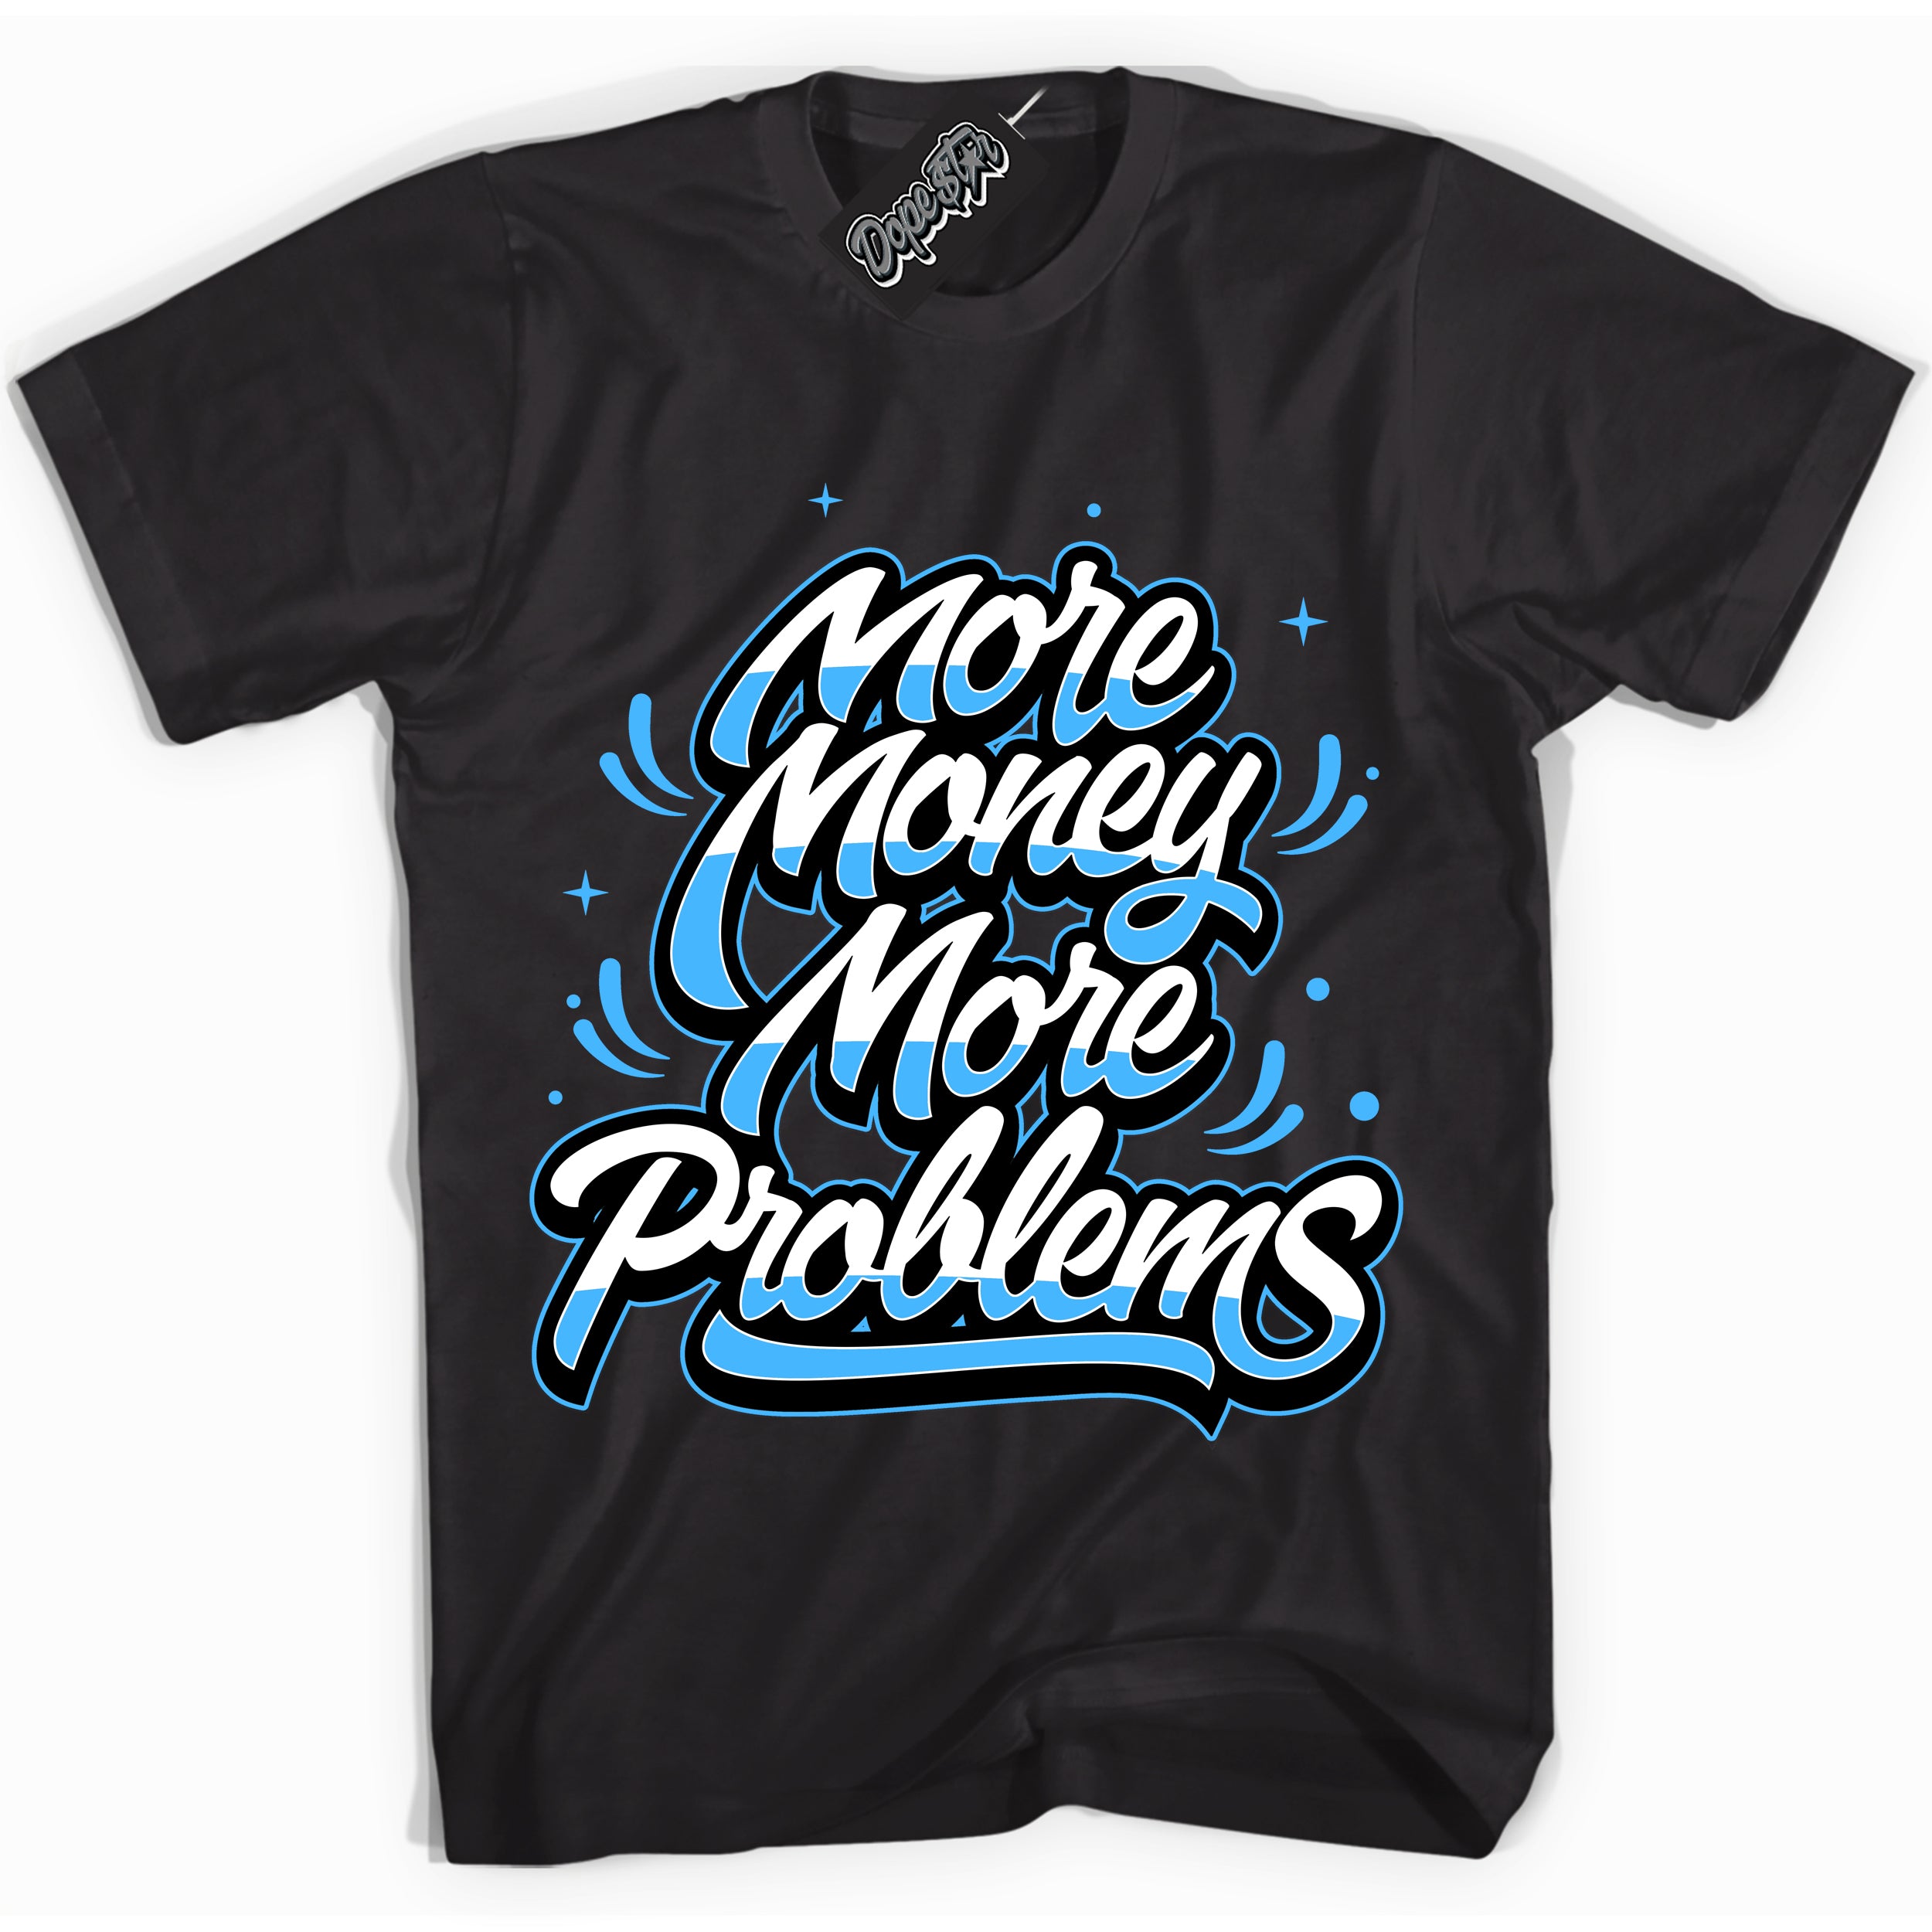 Cool Black graphic tee with “ More Money More Problems ” design, that perfectly matches Powder Blue 9s sneakers 